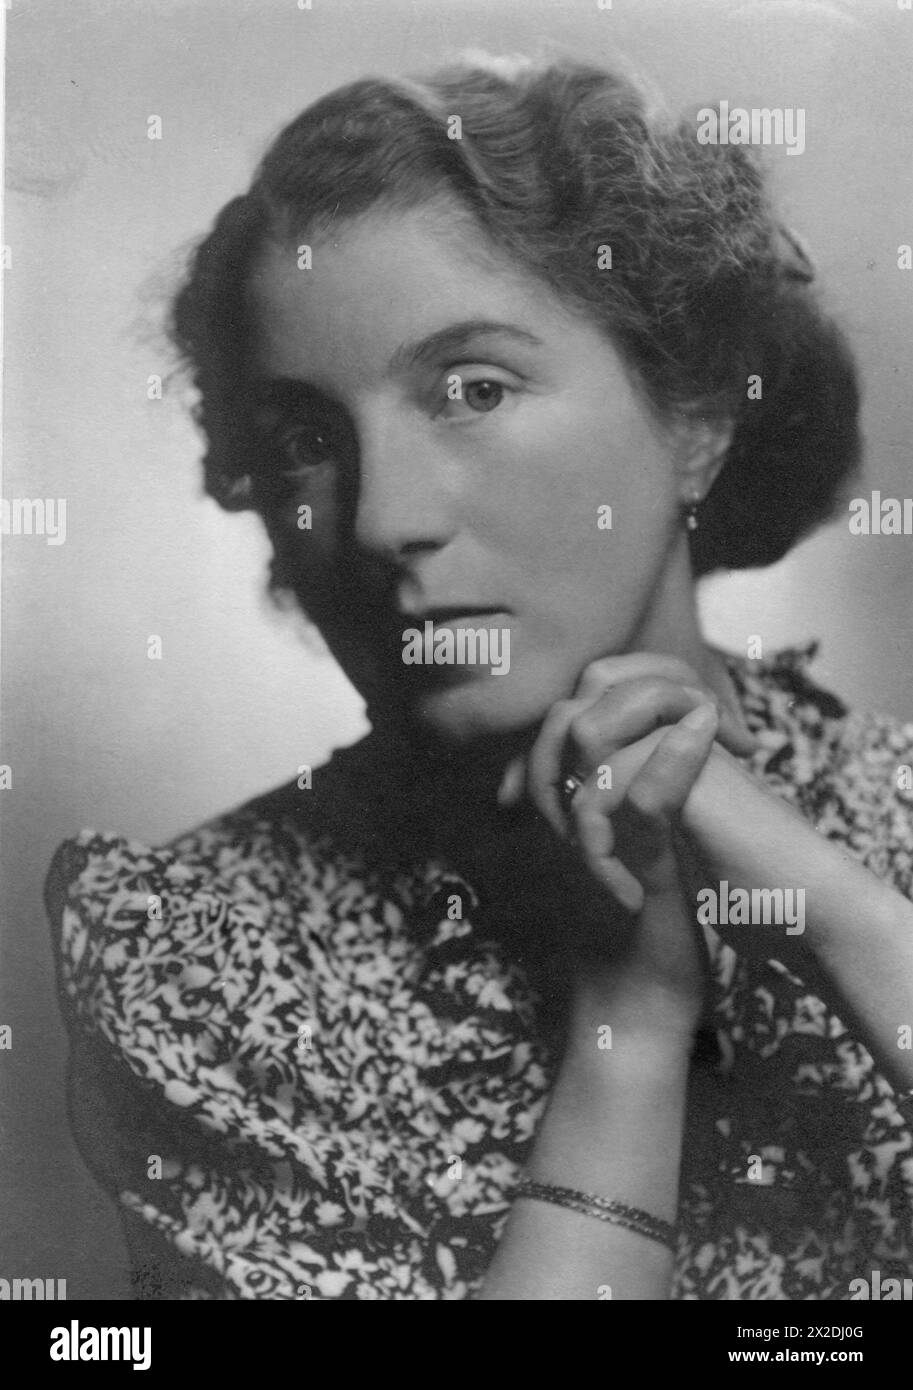 Walde, Hilde, German authoress / writer, 1941, ADDITIONAL-RIGHTS-CLEARANCE-INFO-NOT-AVAILABLE Stock Photo